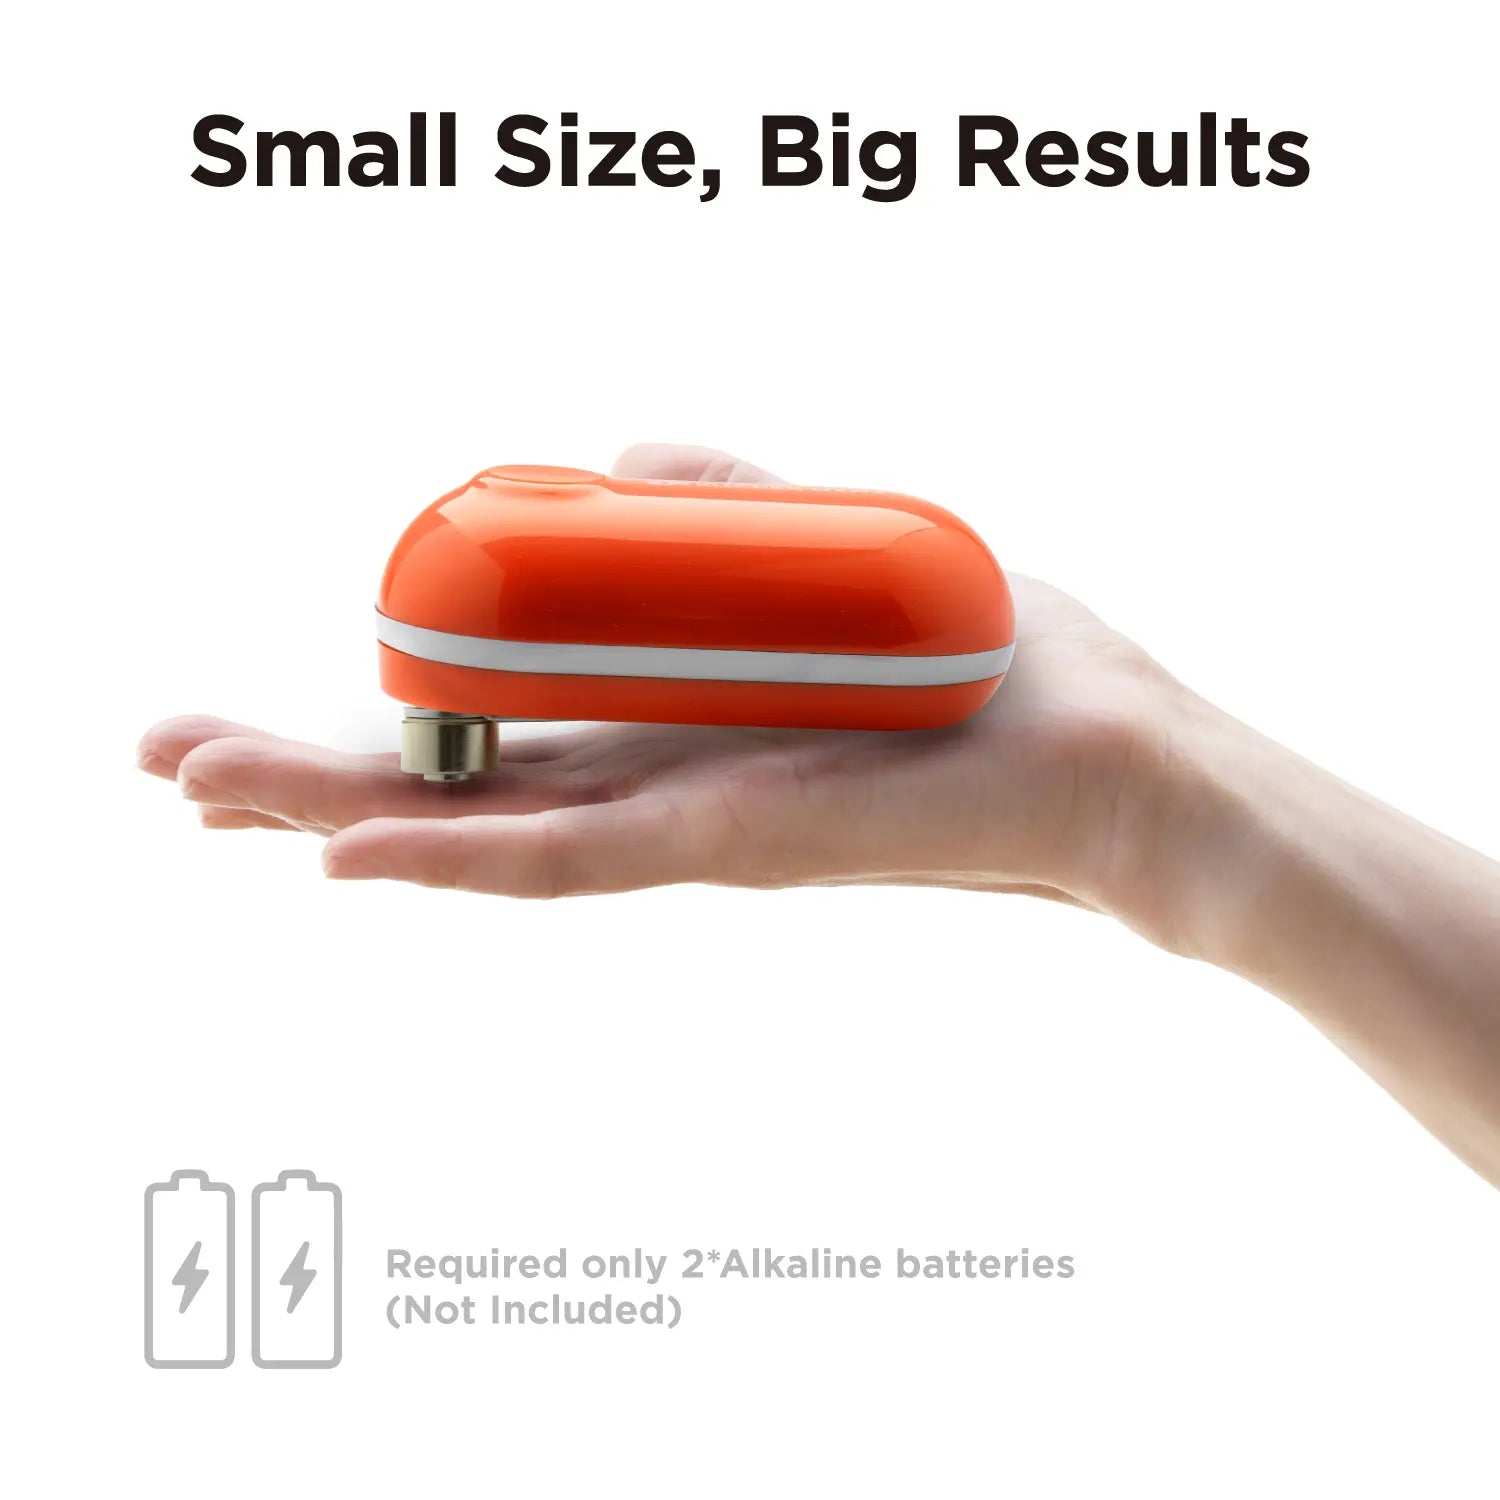 Mini Electric Can Opener - The Smallest Electric Can Opener, Orange, CO1200-O, battery operated can openers top rated, can opener electric smooth edge, auto can openers, can electric opener, smooth edge electric can opener,portable can opener